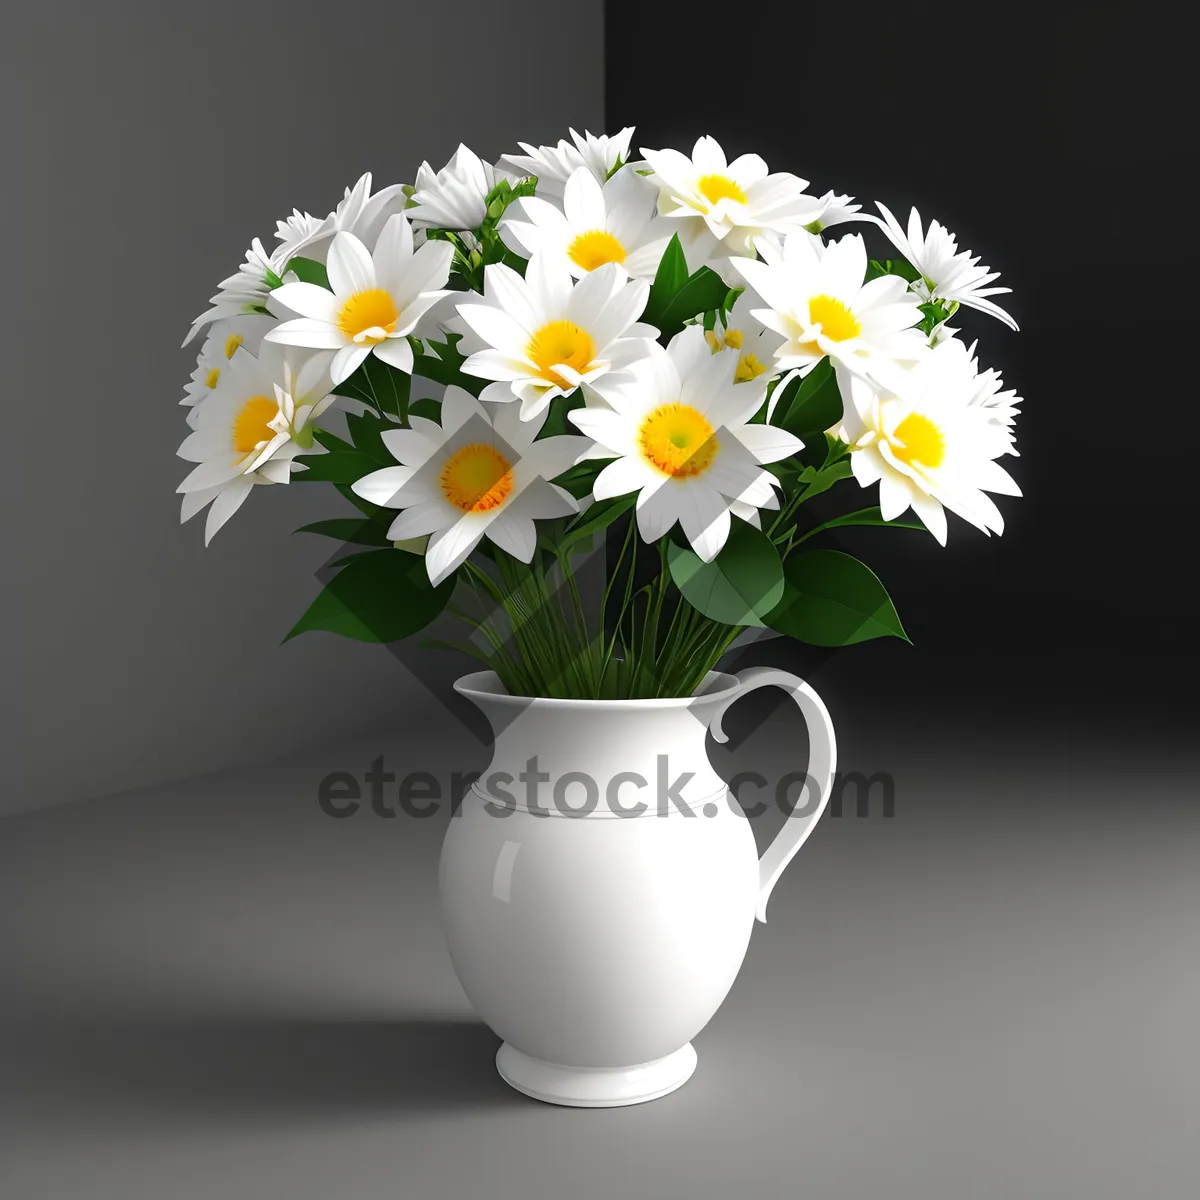 Picture of White Daisy Bouquet in Floral Vase